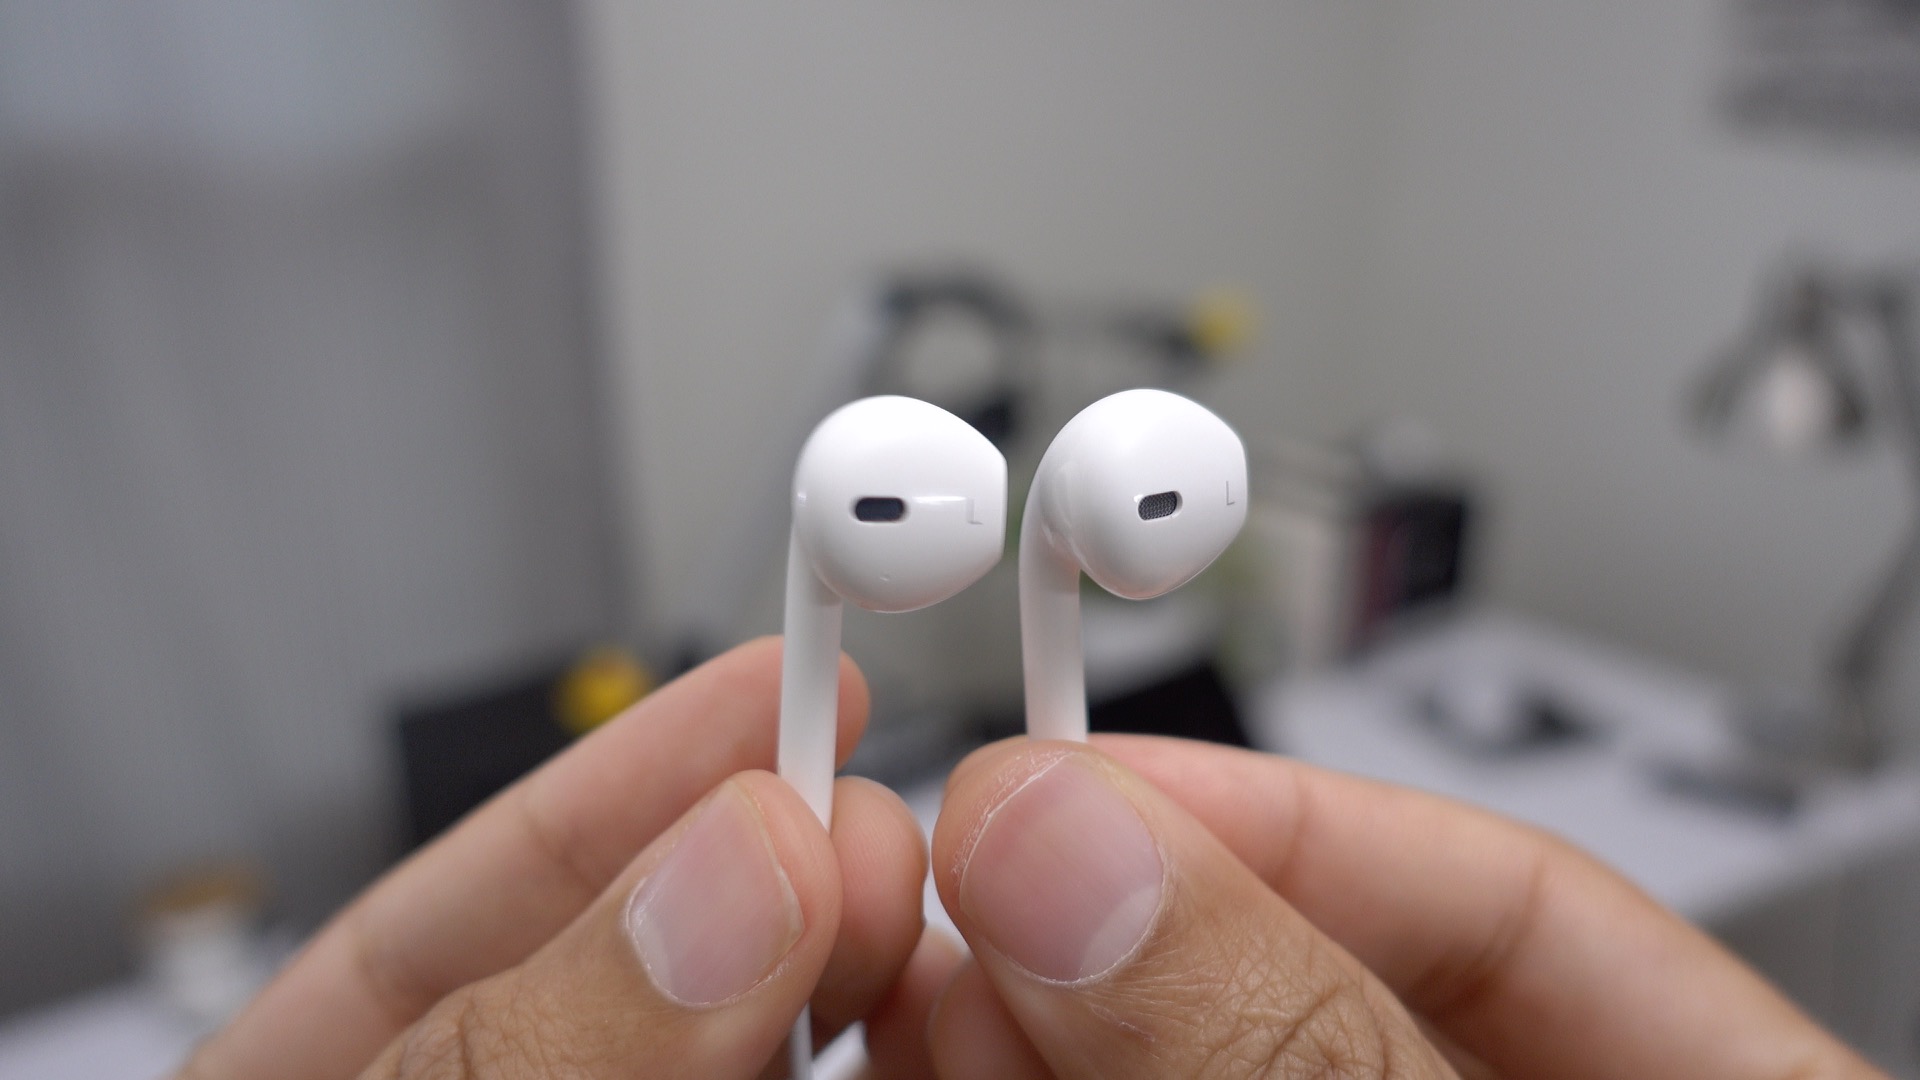 Apple's new $19 USB-C EarPods apparently support lossless audio - 9to5Mac